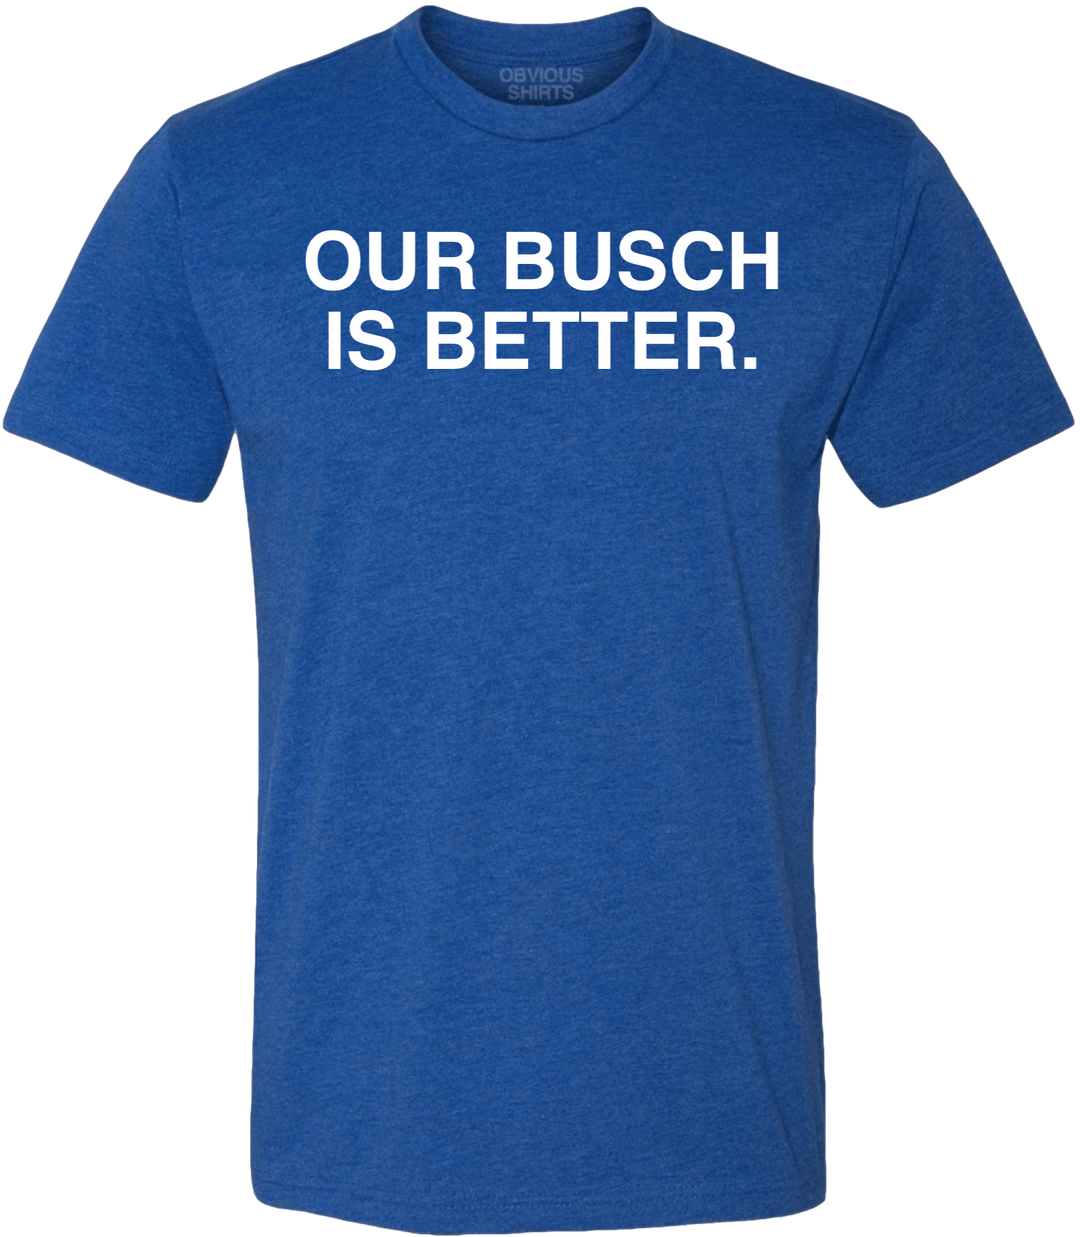 OUR BUSCH IS BETTER. - OBVIOUS SHIRTS